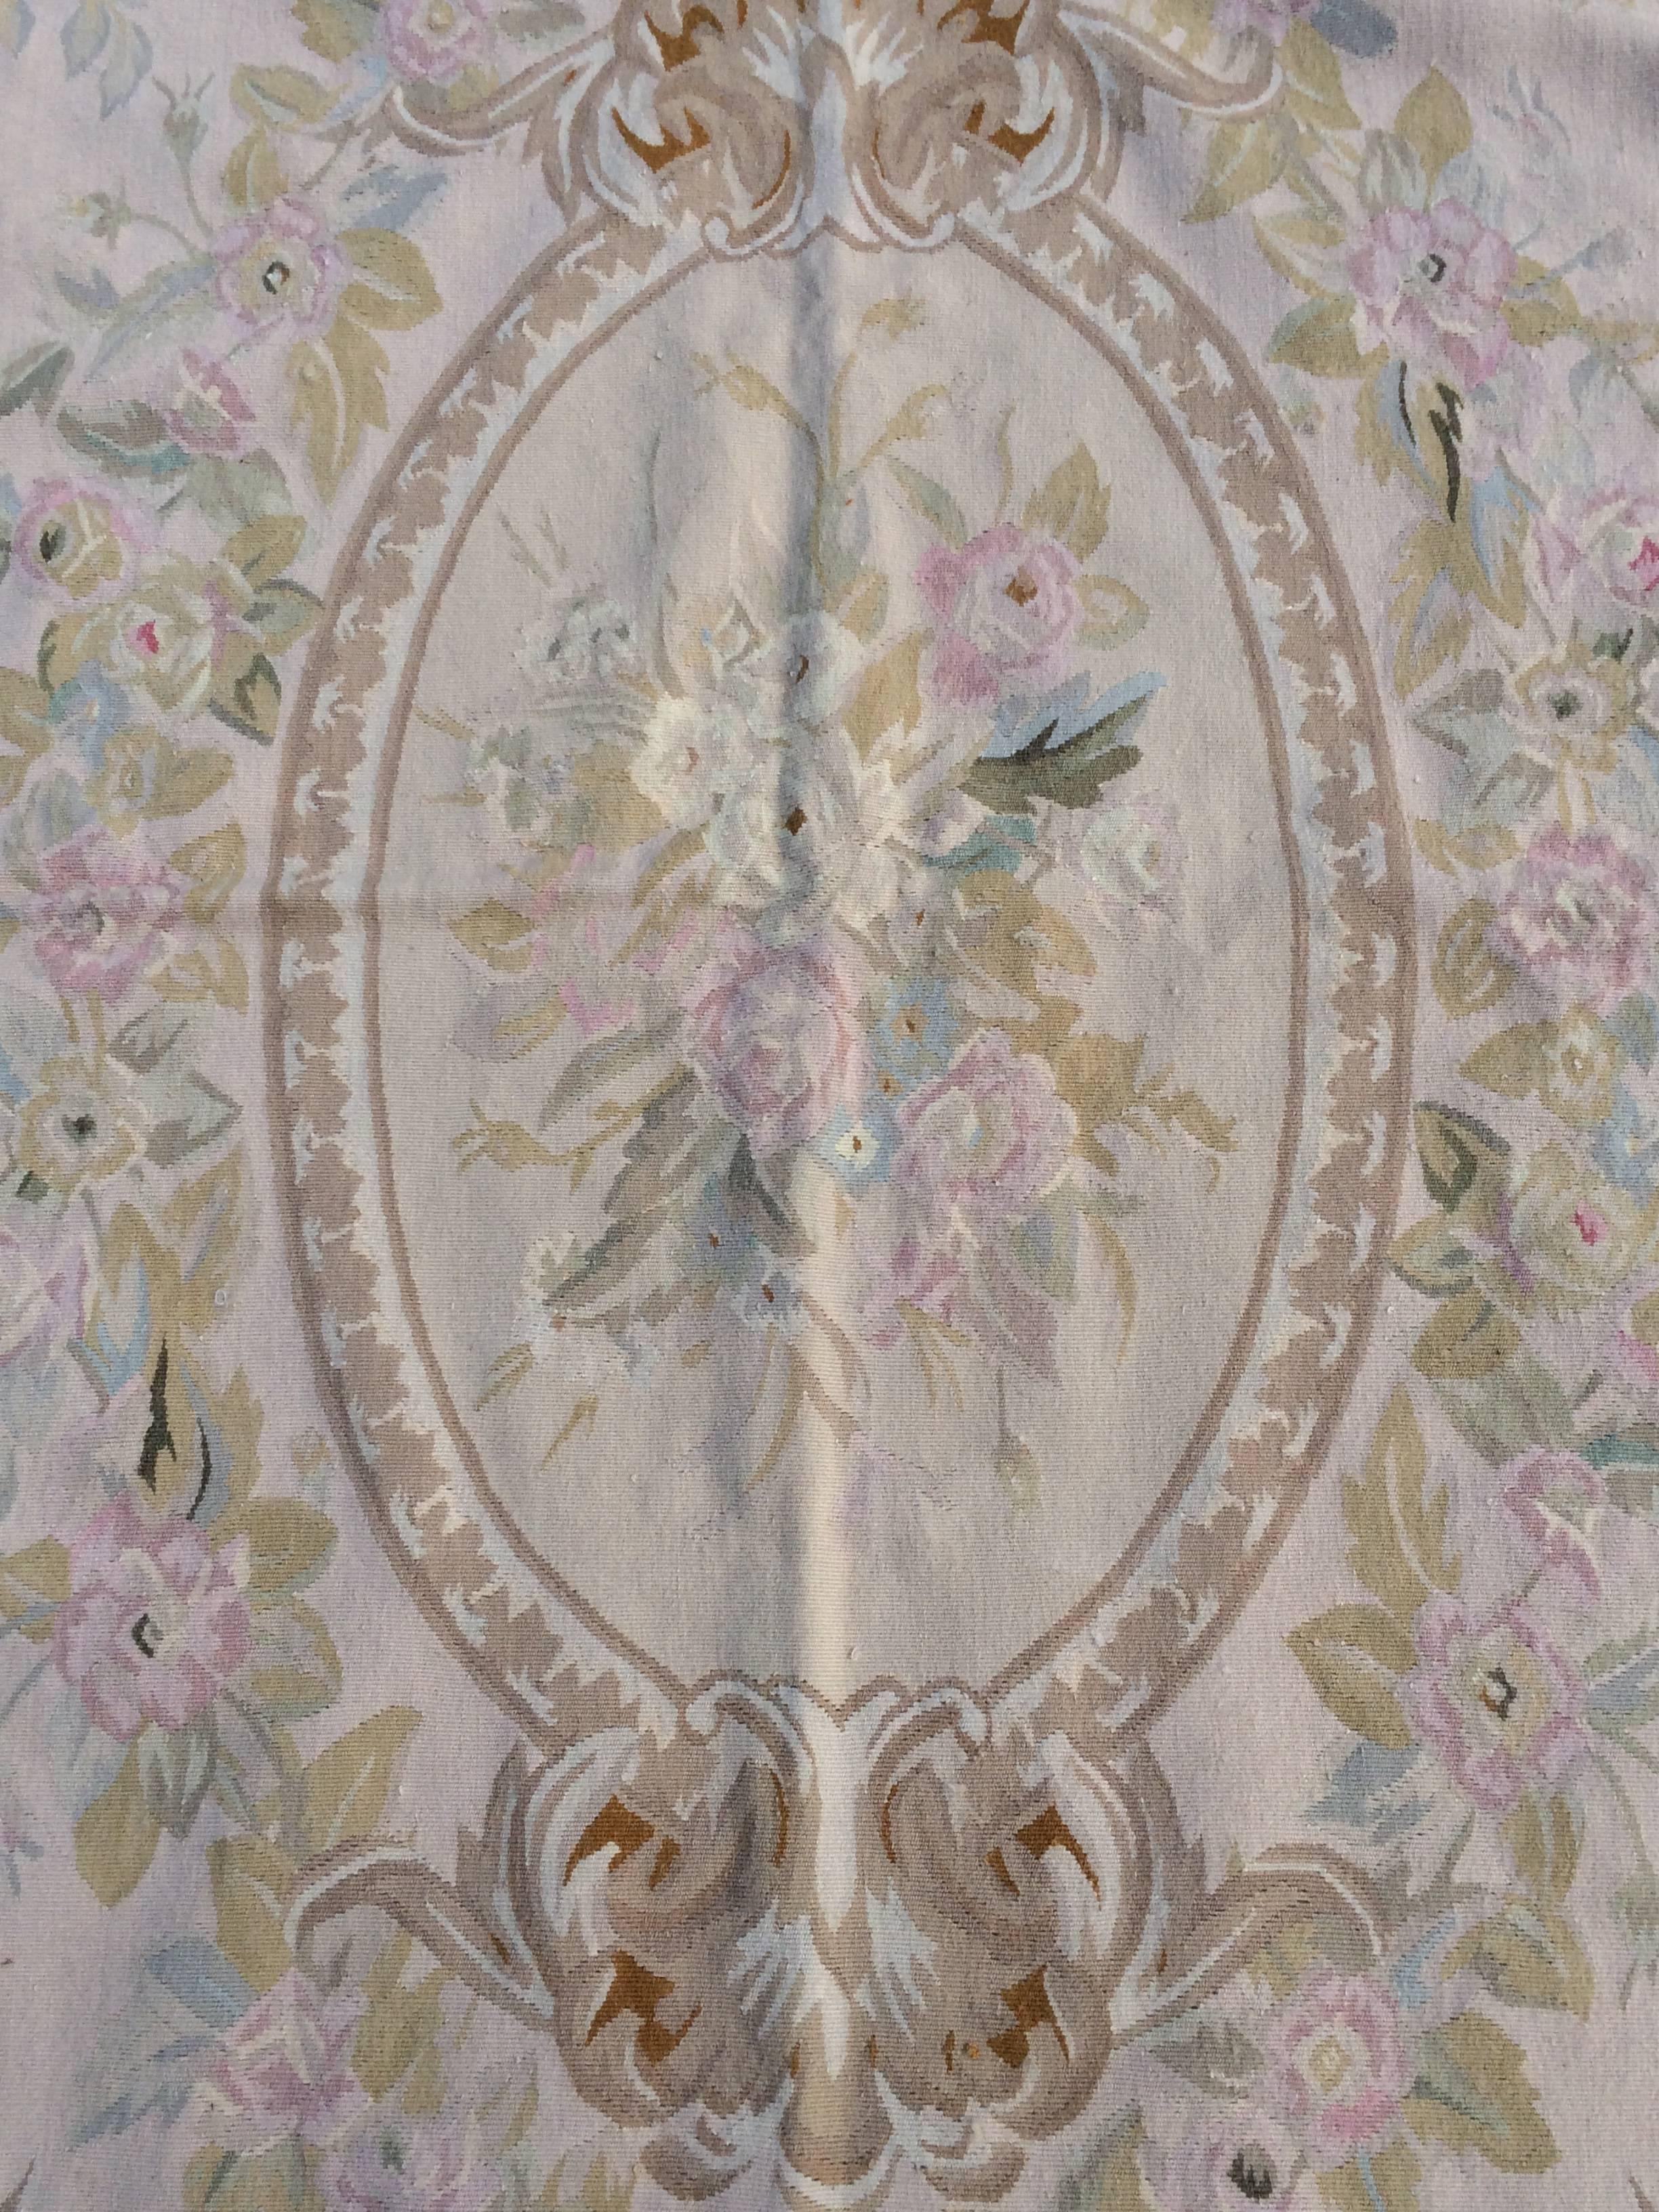 Chinese Pale Tone Aubusson Rug, New with Tags 6'x9'